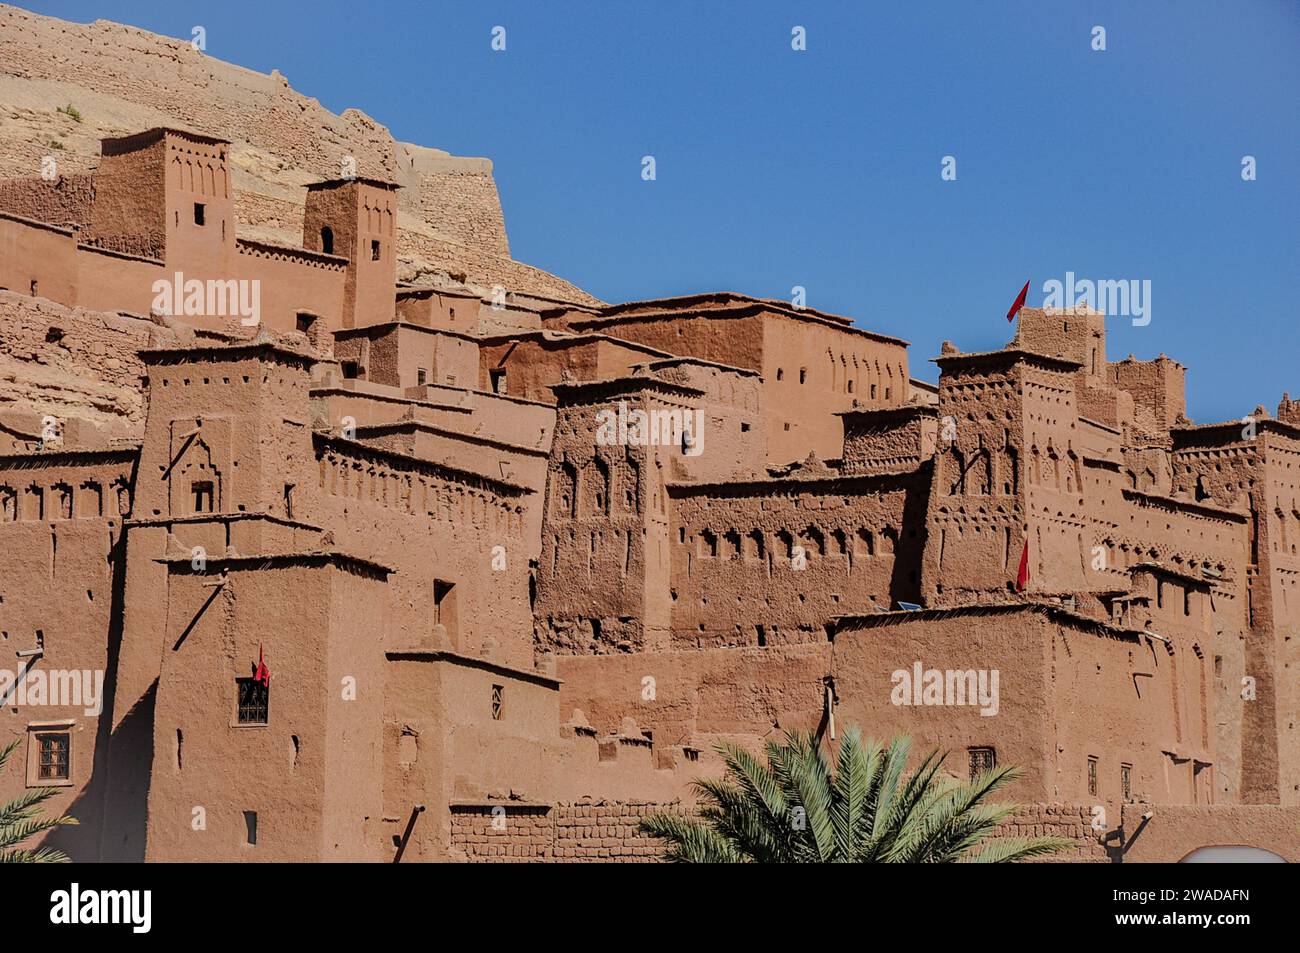 11th century Ksar of Aït Benhaddou, famous for being the best preserved example of Moroccan earthen clay architecture. Aït Benhaddou, Morocco Stock Photo